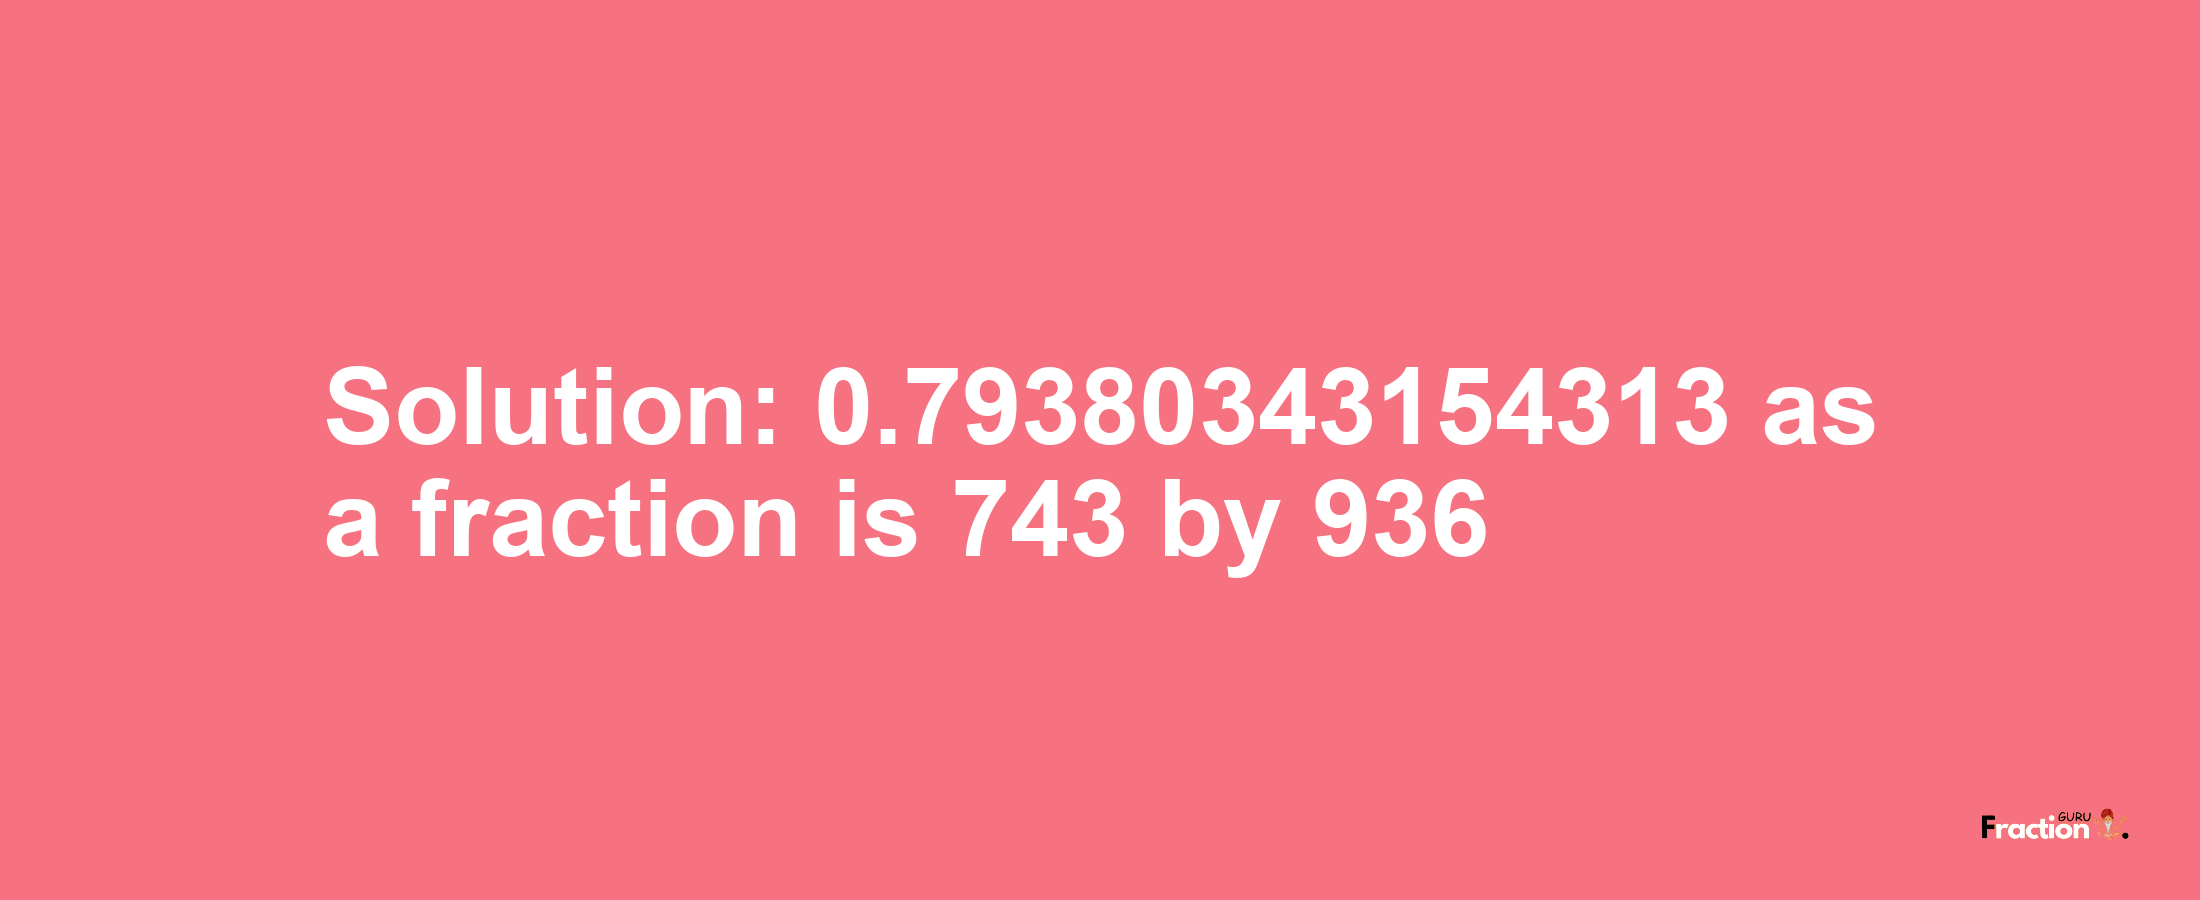 Solution:0.79380343154313 as a fraction is 743/936